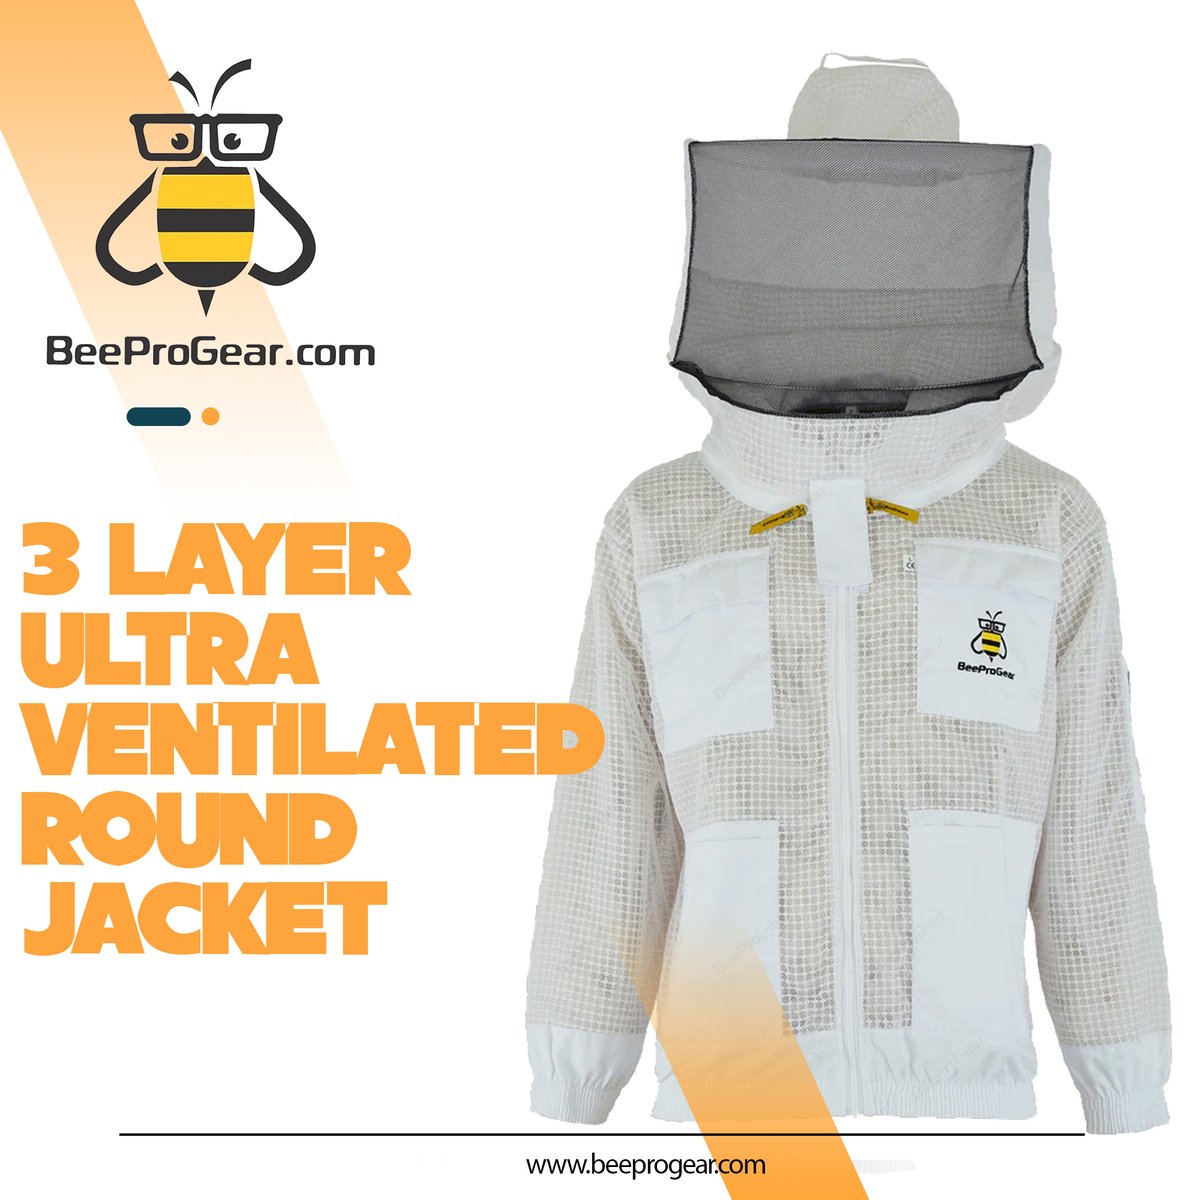 Beeprogear | 3 Layer Ultra Ventilated Round Jacket | With 30% Off
Shop Now: beeprogear.com
#beeprogear #beekeeping #beekeepinglife #beekeeping101 #backyardbeekeeping #urbanbeekeeping #beekeepinglikeagirl #naturalbeekeeping #naturalbeekeeping #beekeepingadventures